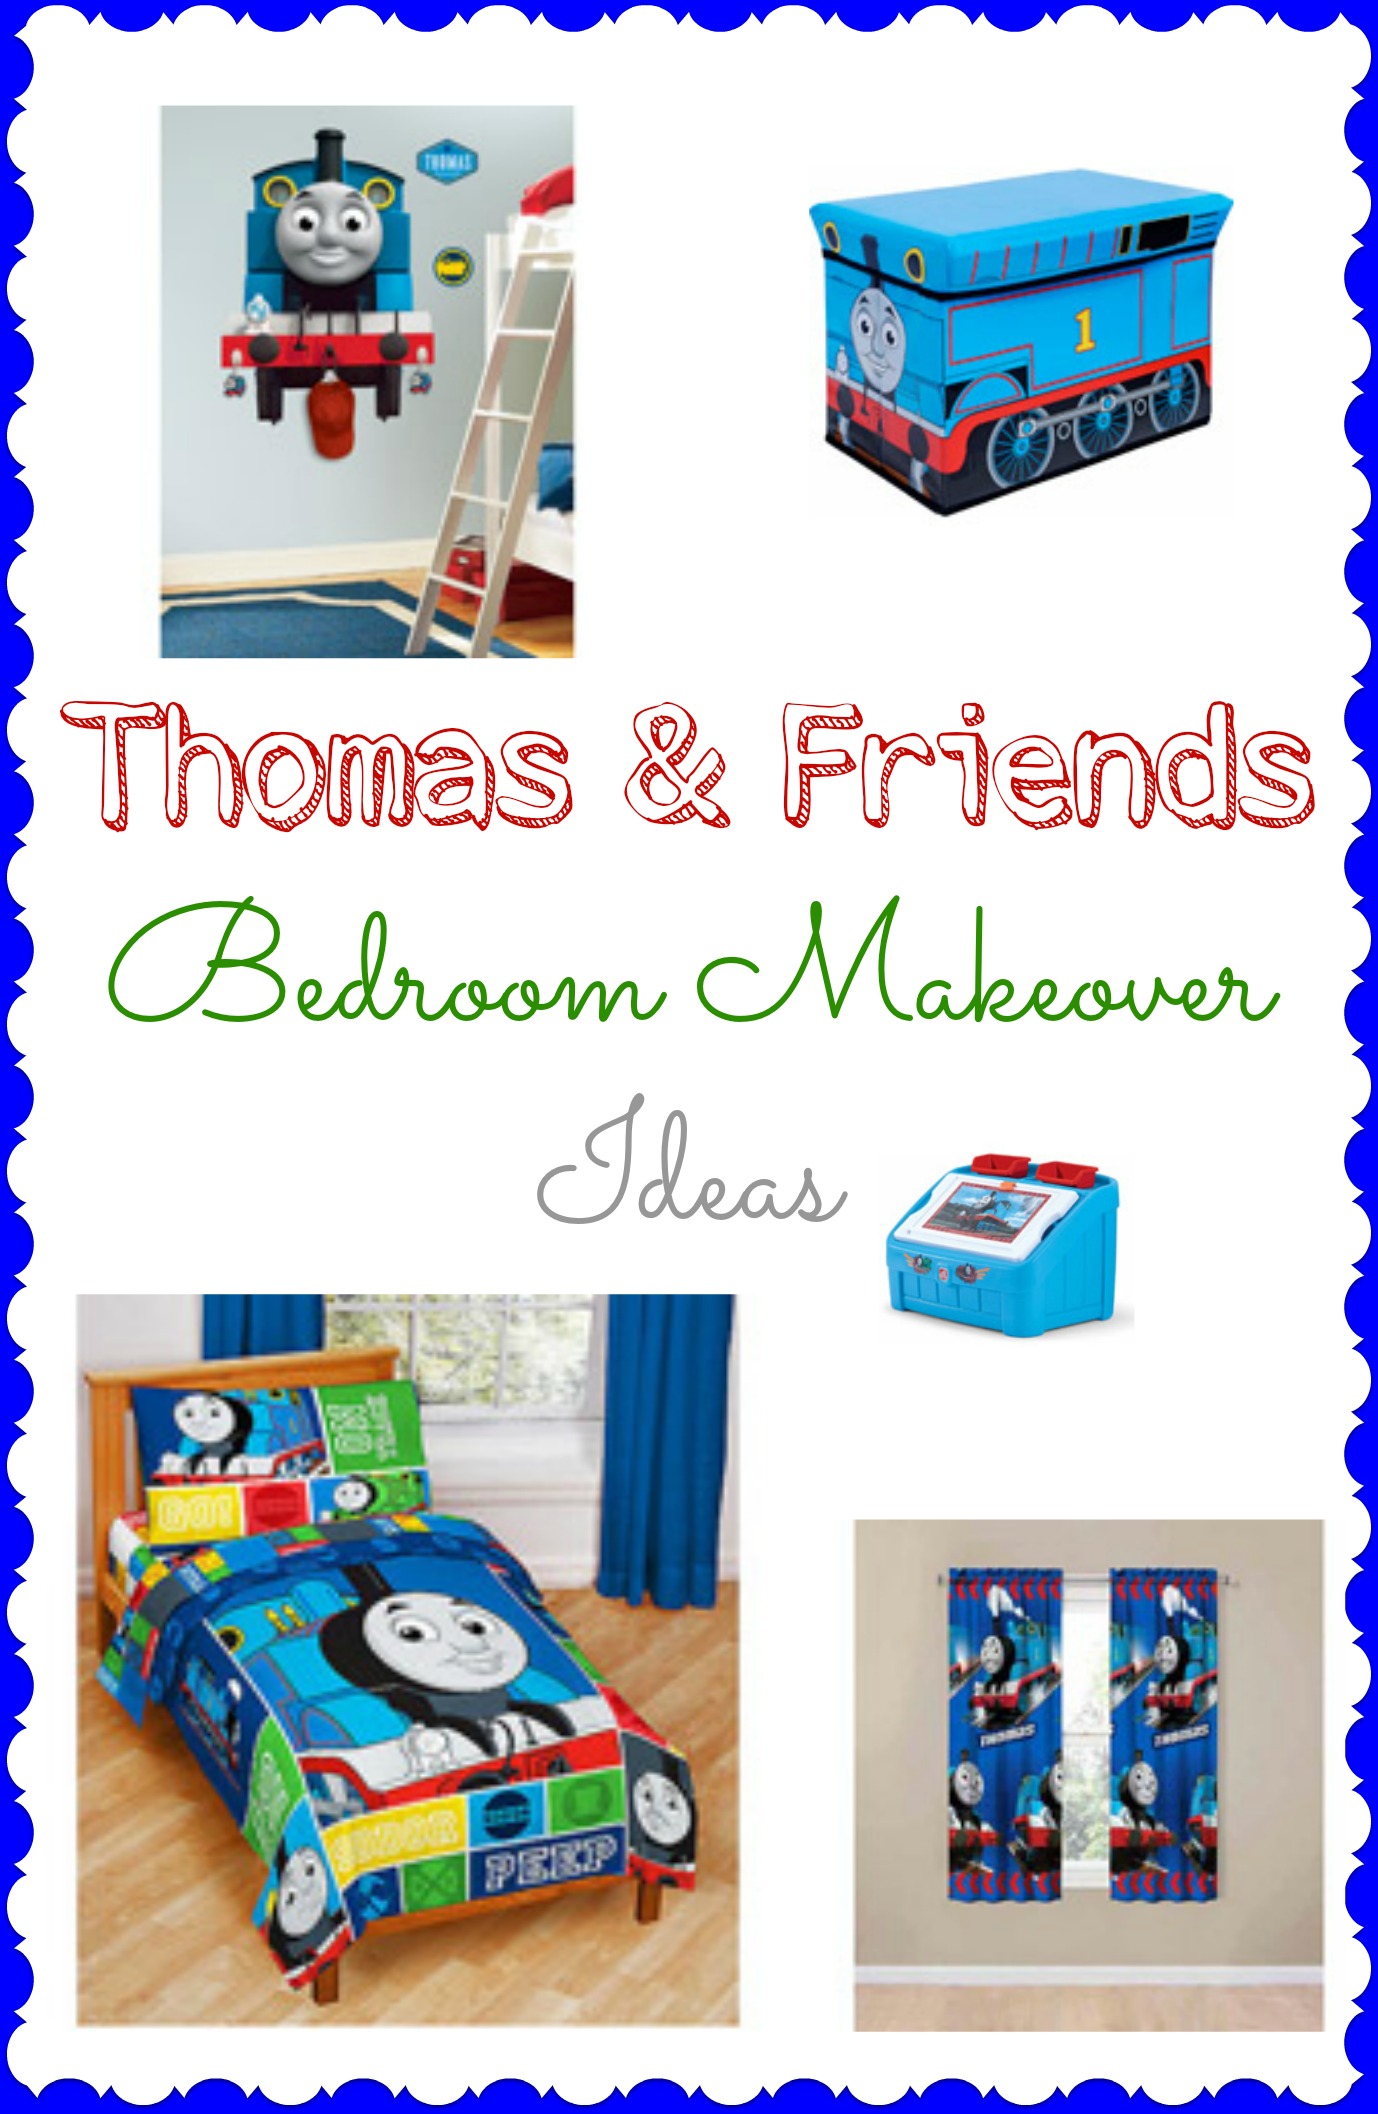 Thomas & Friends Bedroom Makeover 